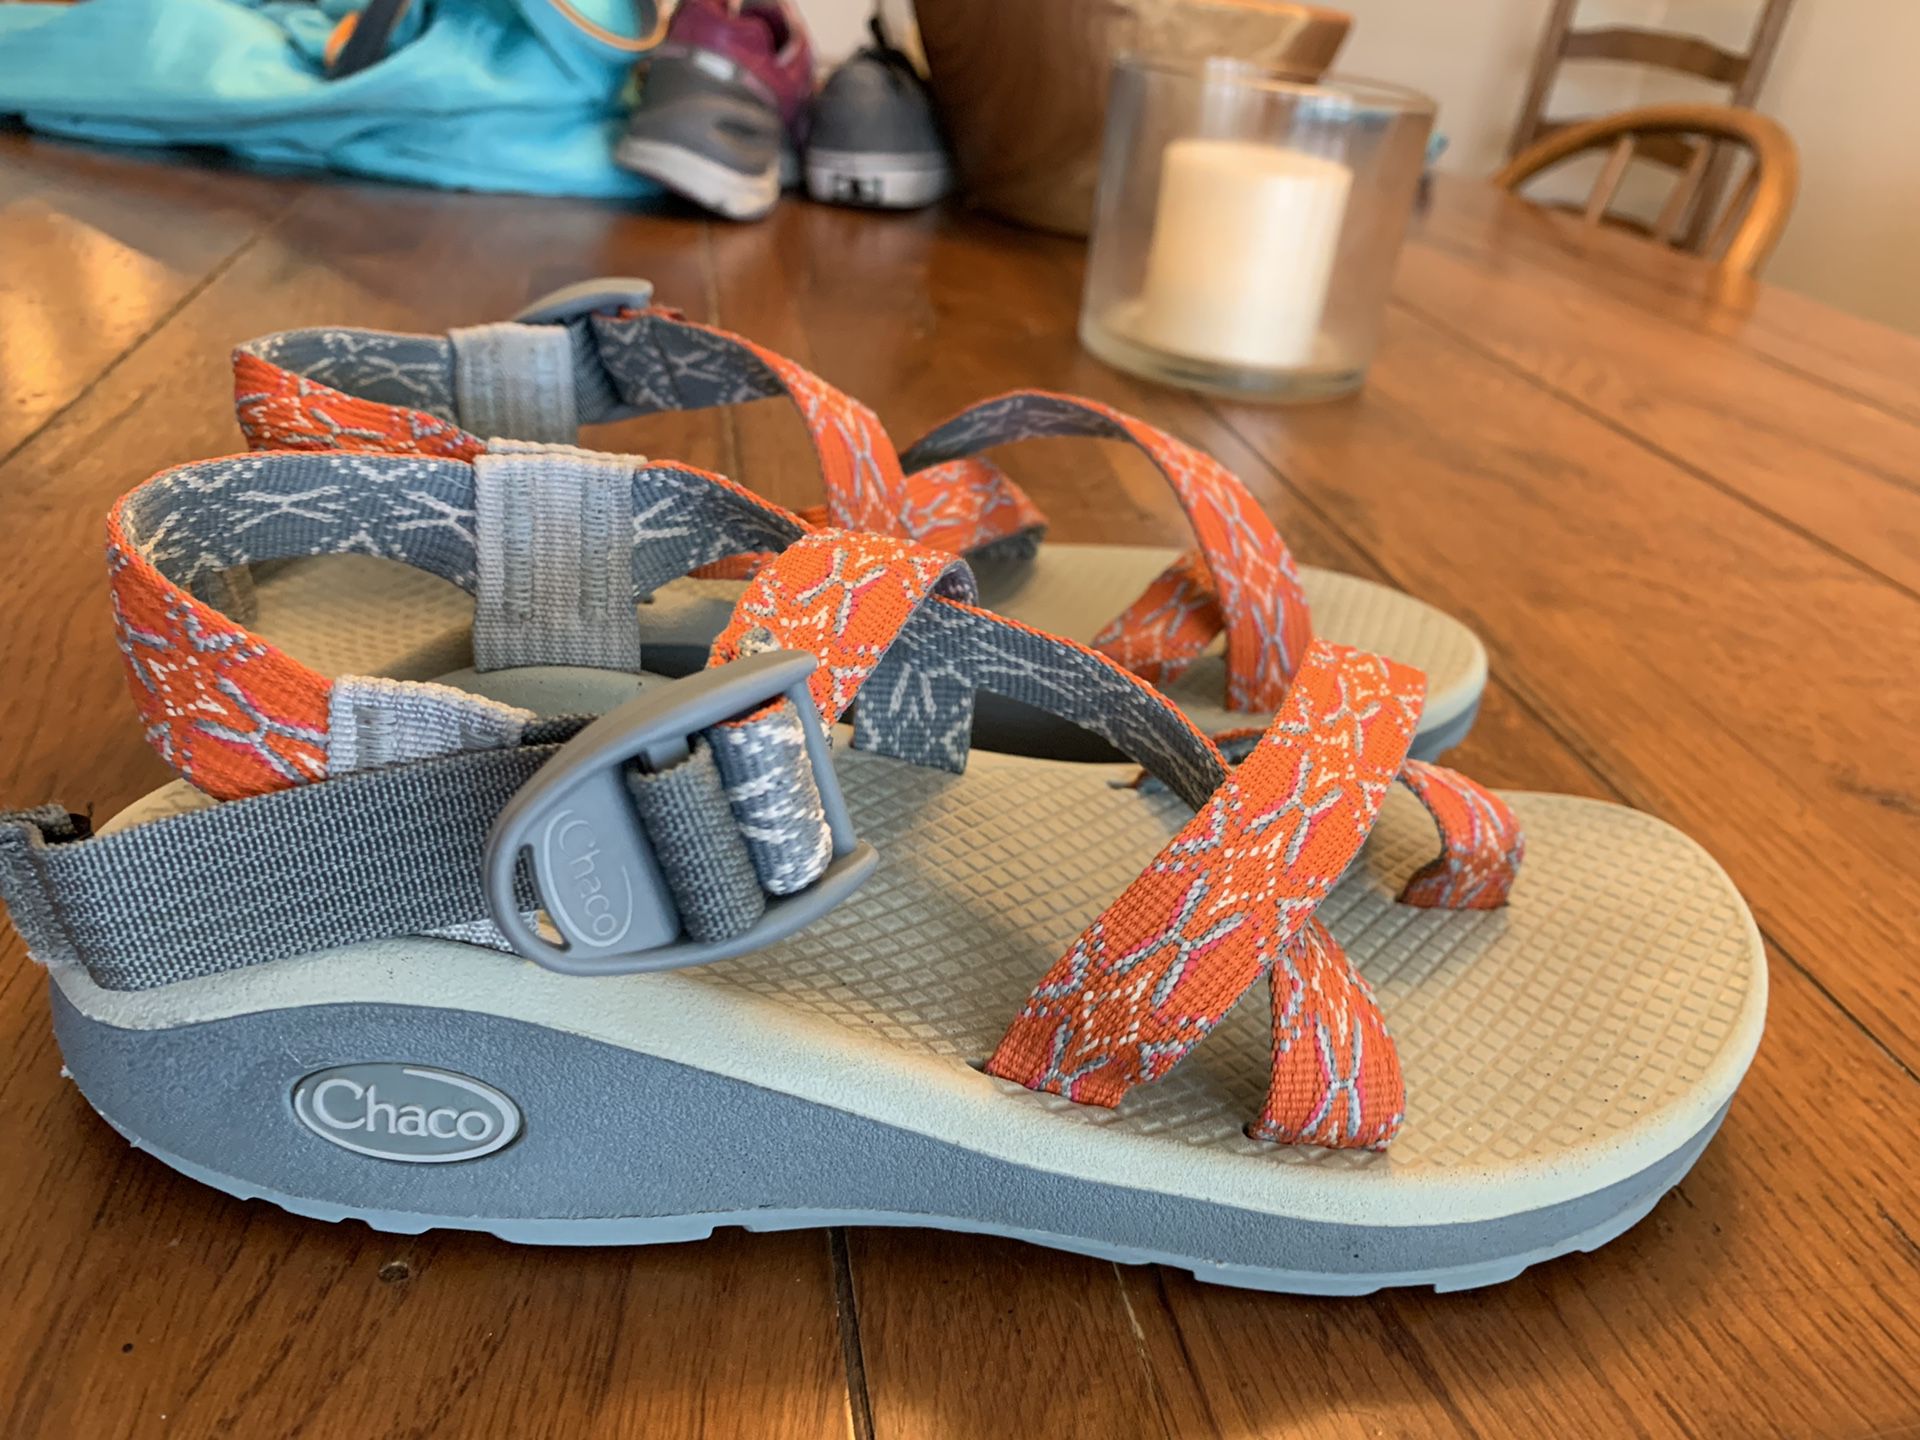 Chacos Women’s Size 7